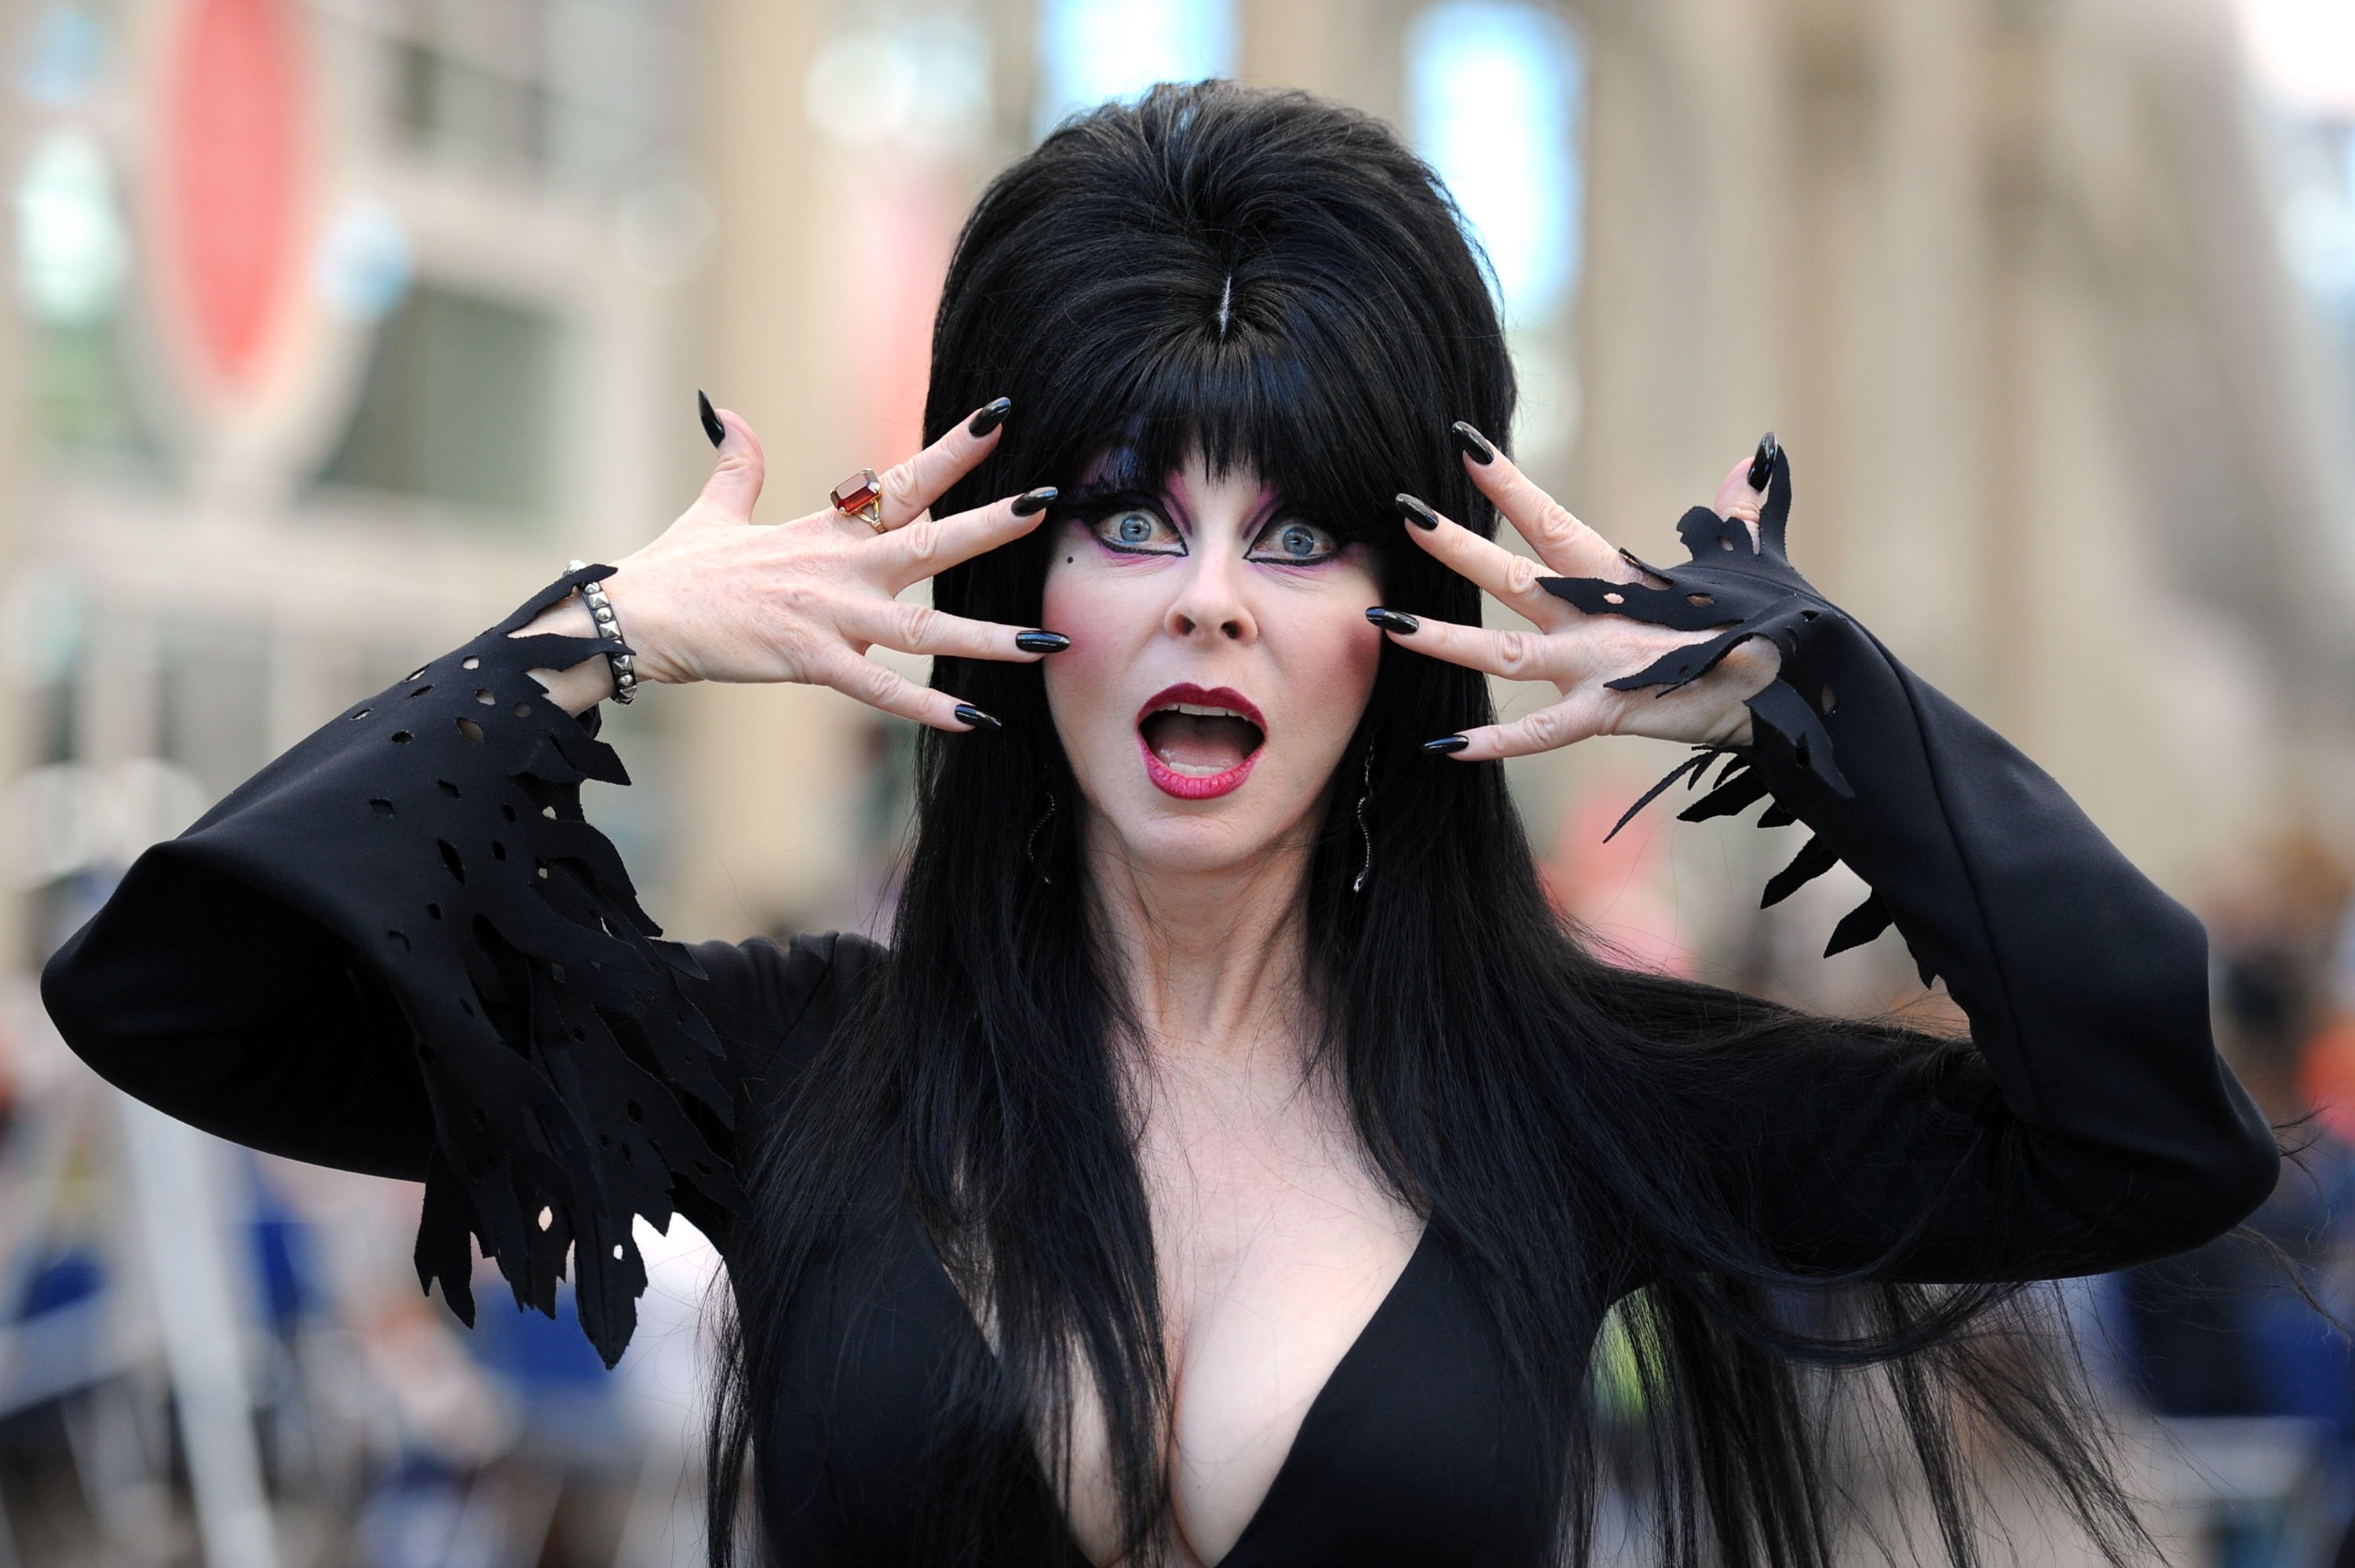 How Old Is Elvira, Mistress of the Dark and What Is Her Net Worth?